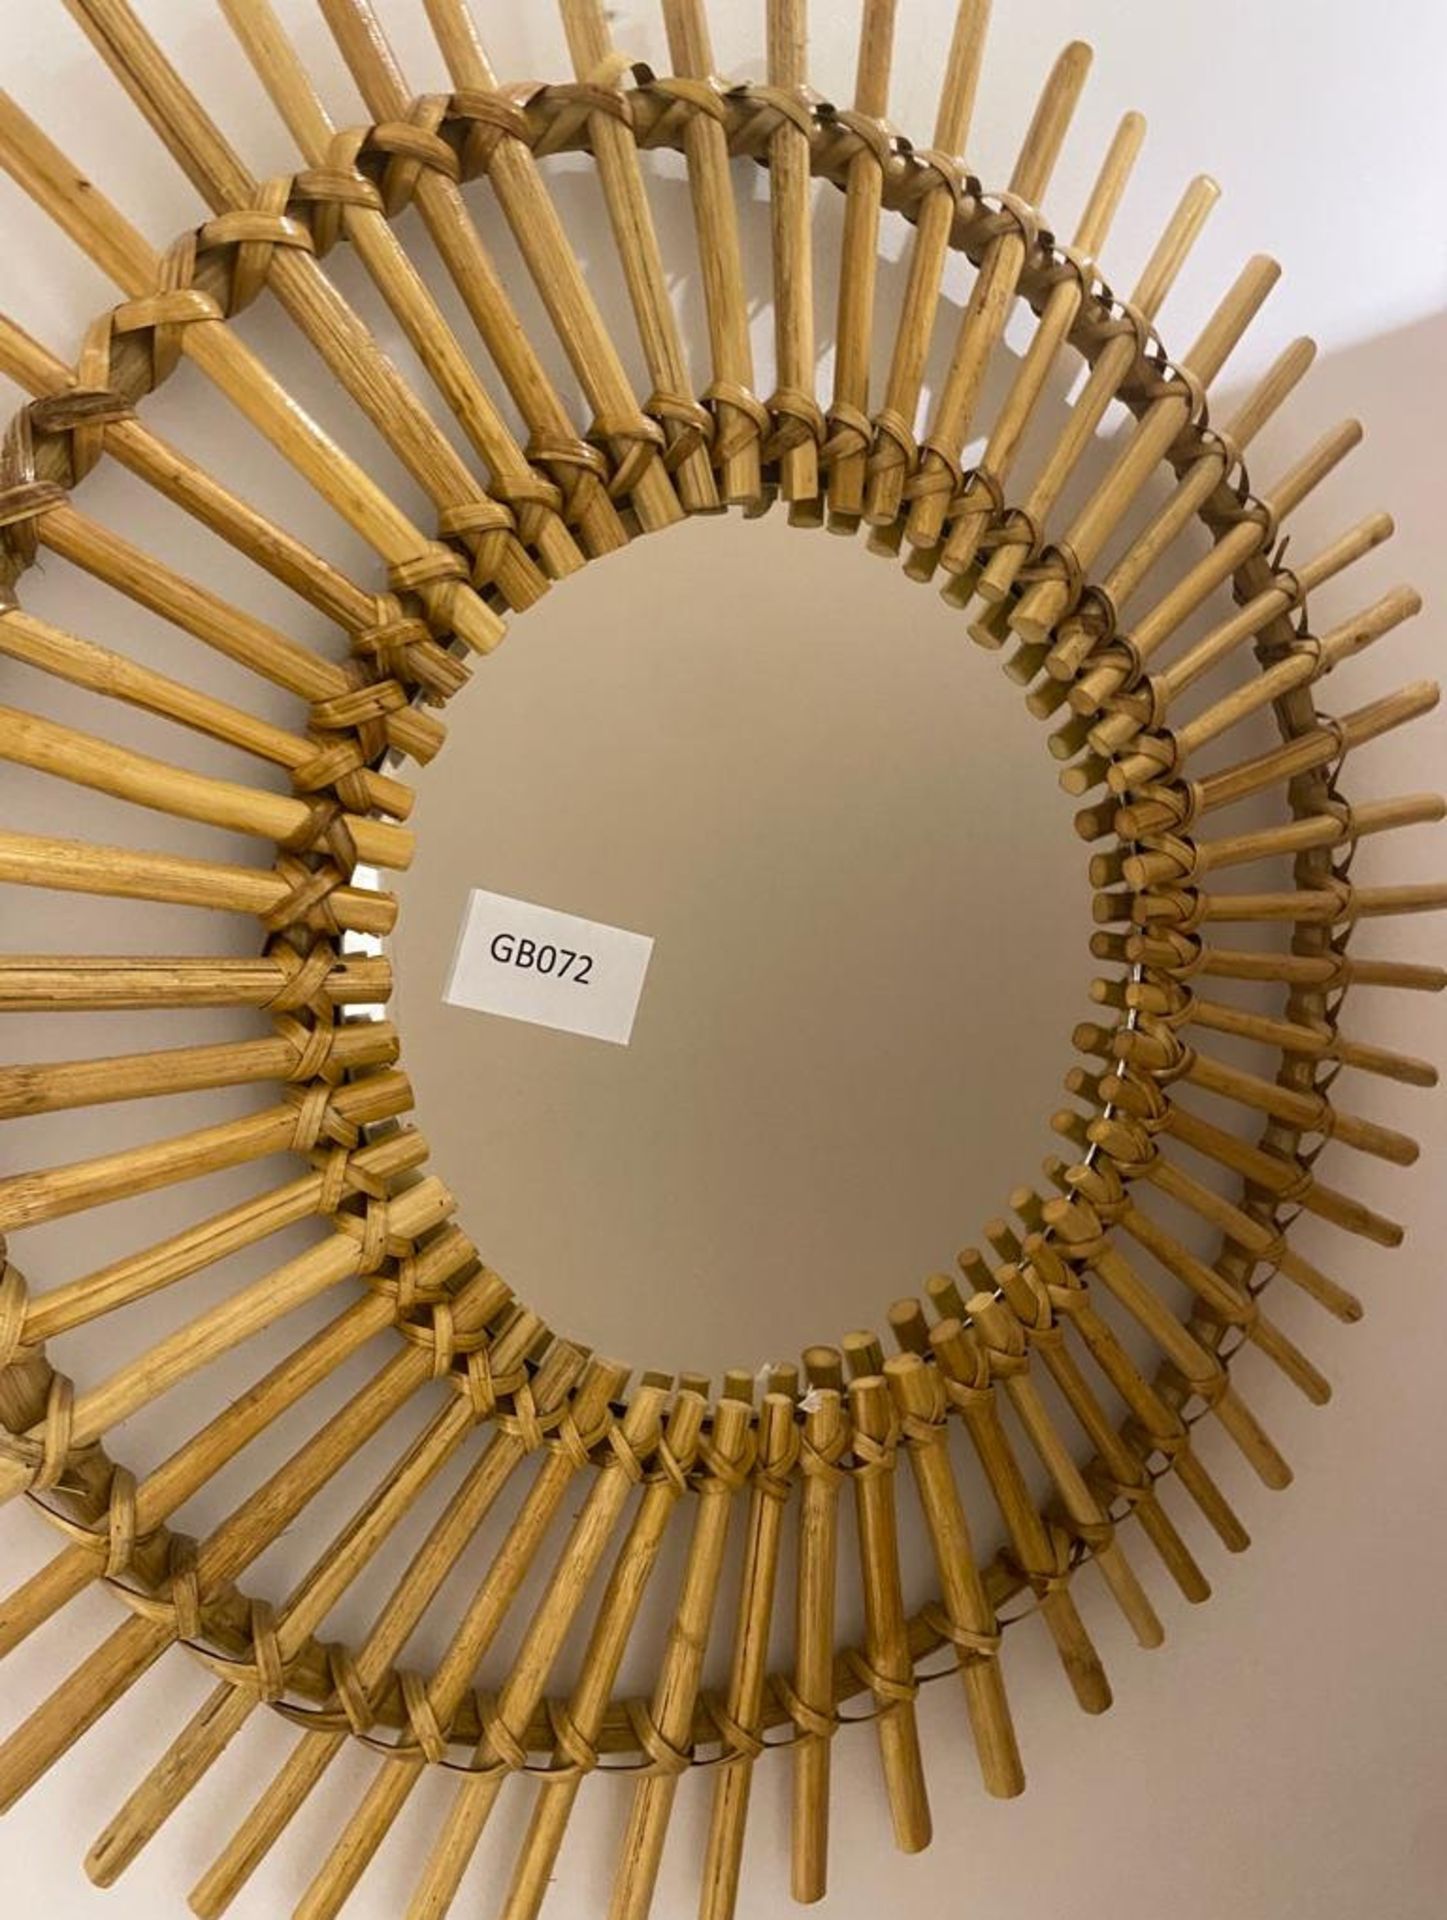 1 x Round Bamboo Mirror - Size: diameter 600mm - CL776 - Ref: GB072 - Location: London W1WFrom a - Image 2 of 2